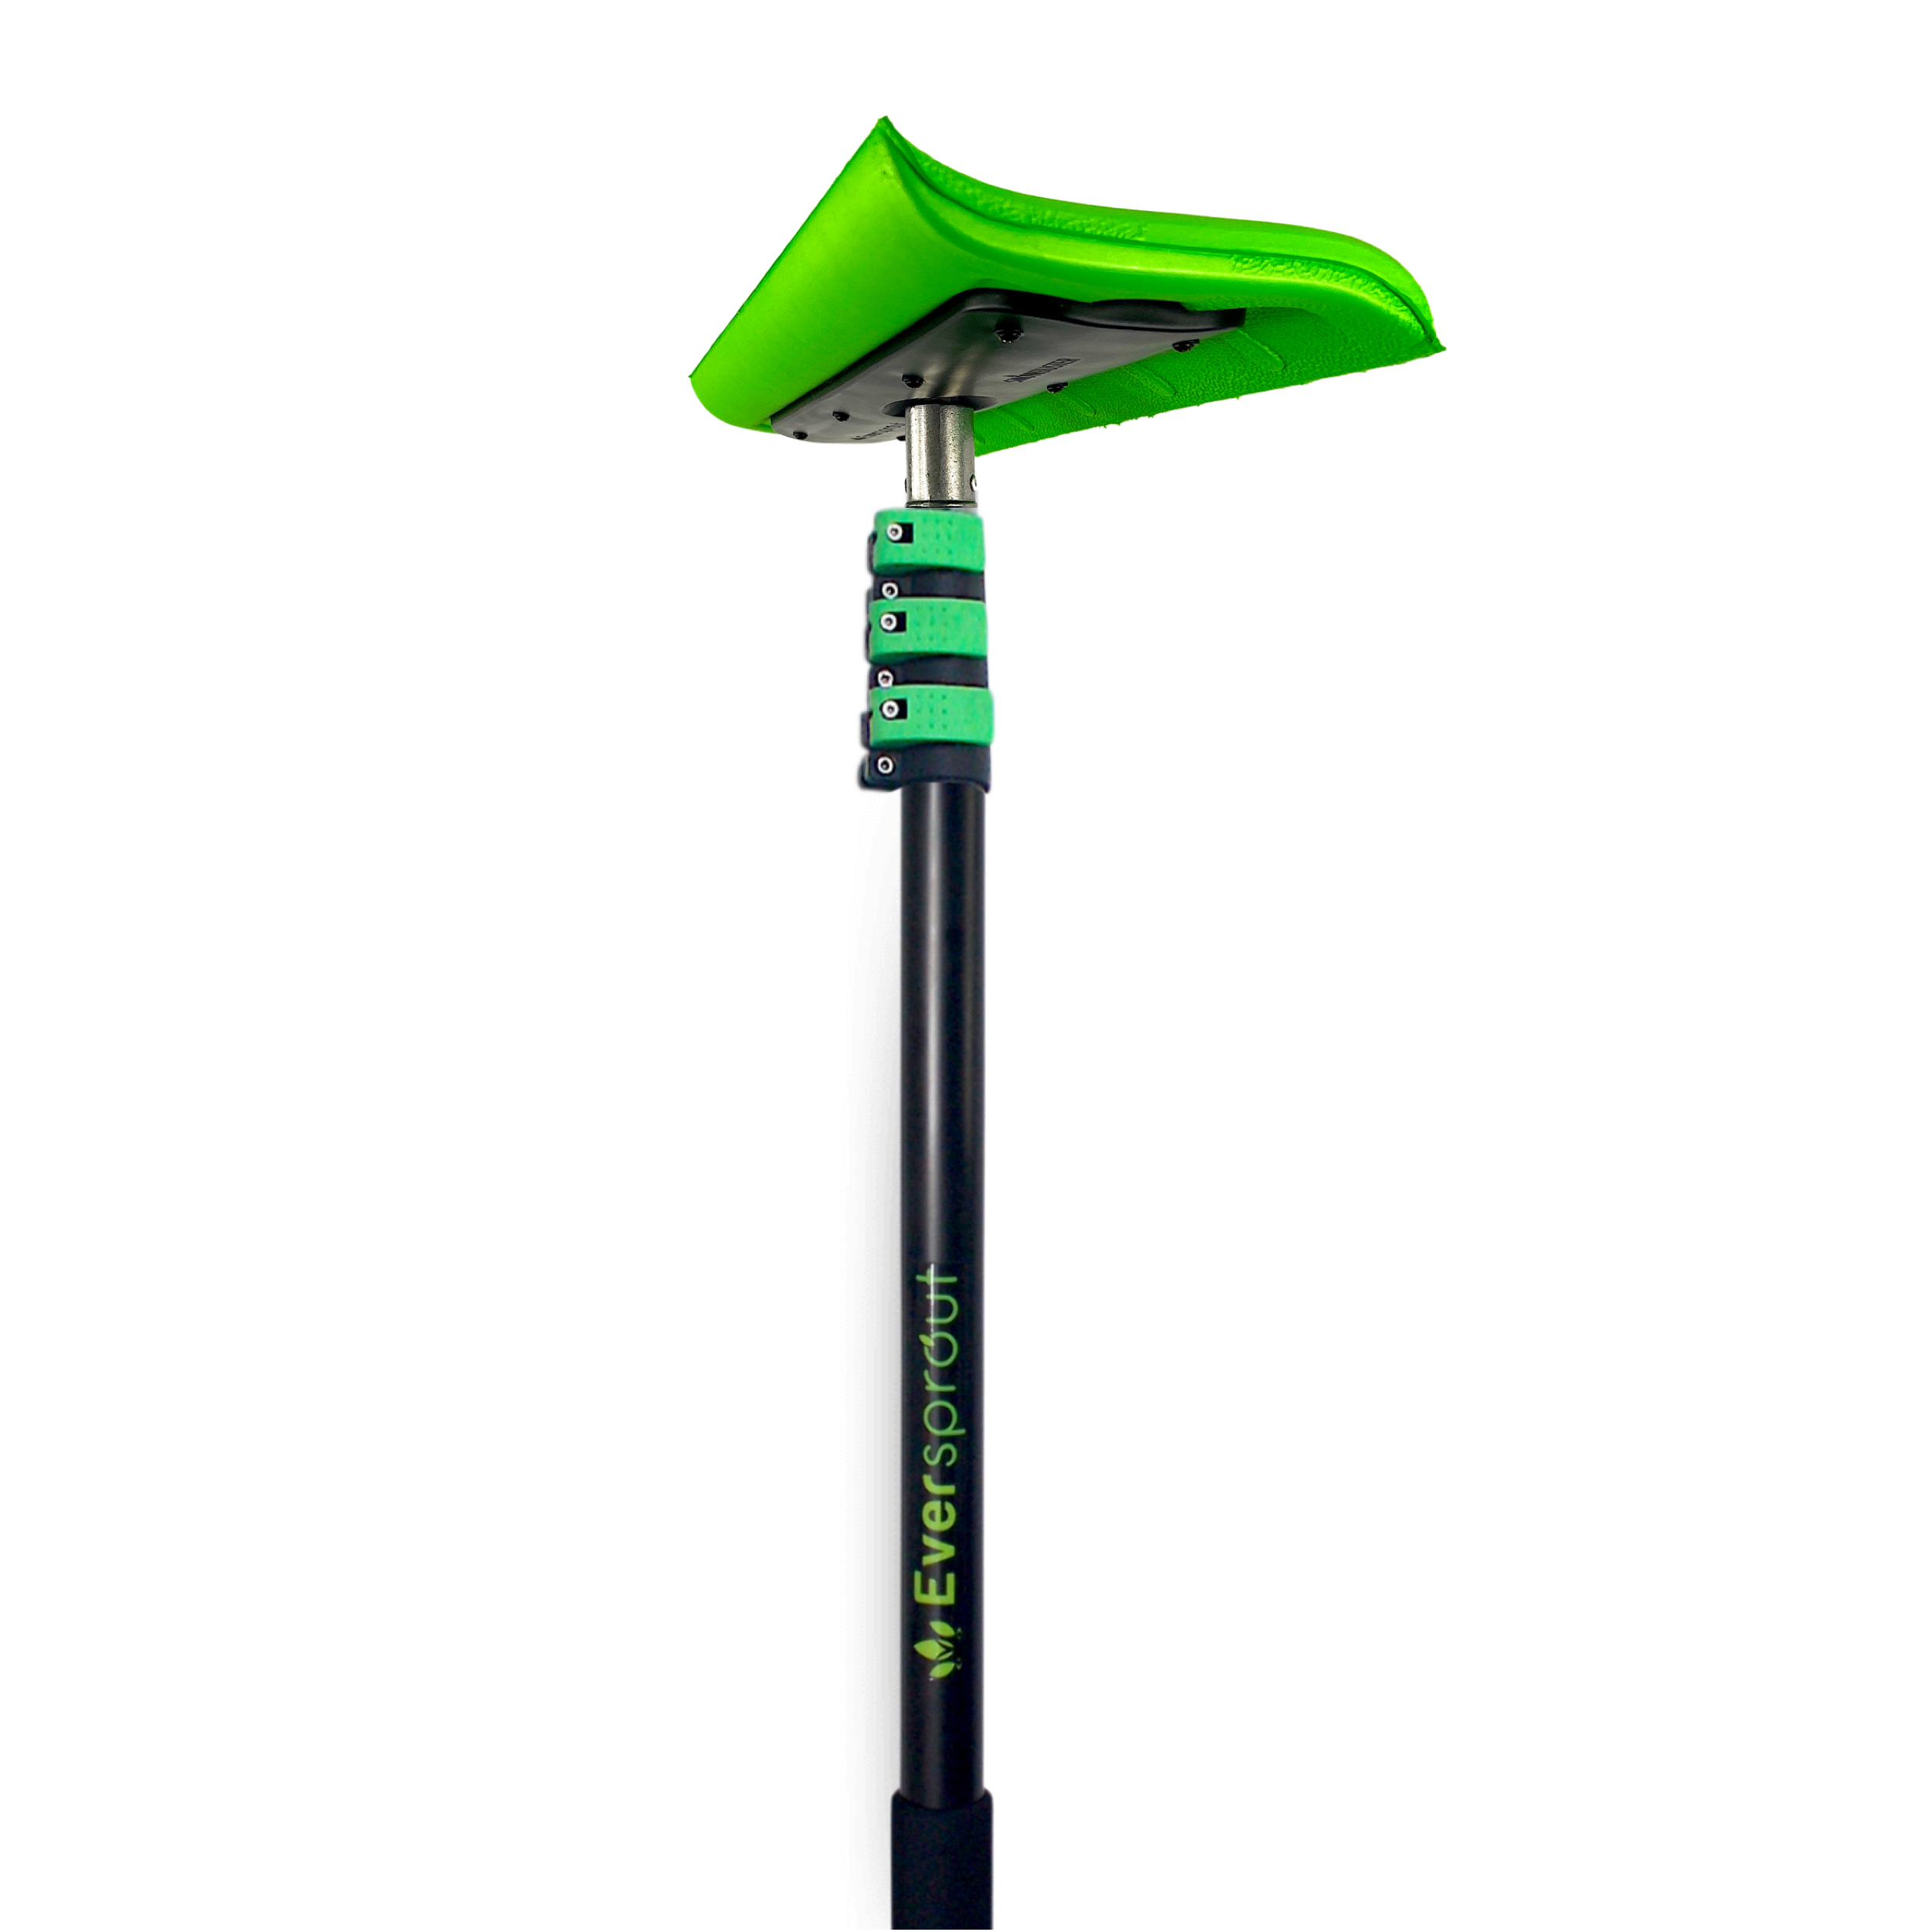 EVERSPROUT Never-Scratch SnowBuster 7-to-24 Foot - image 1 of 7